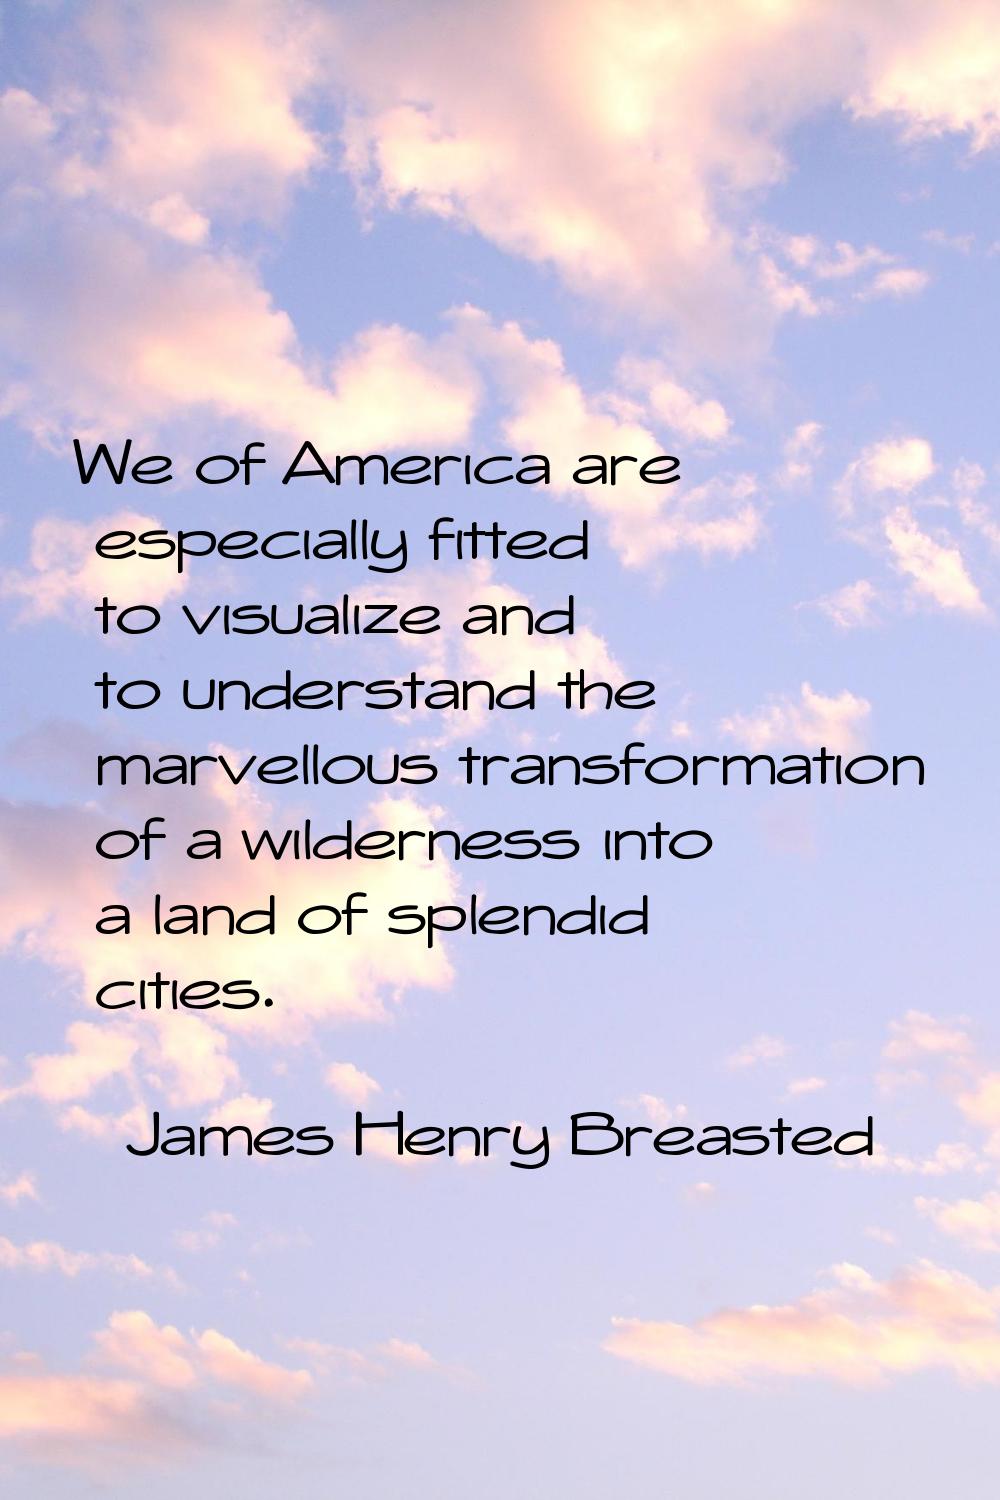 We of America are especially fitted to visualize and to understand the marvellous transformation of